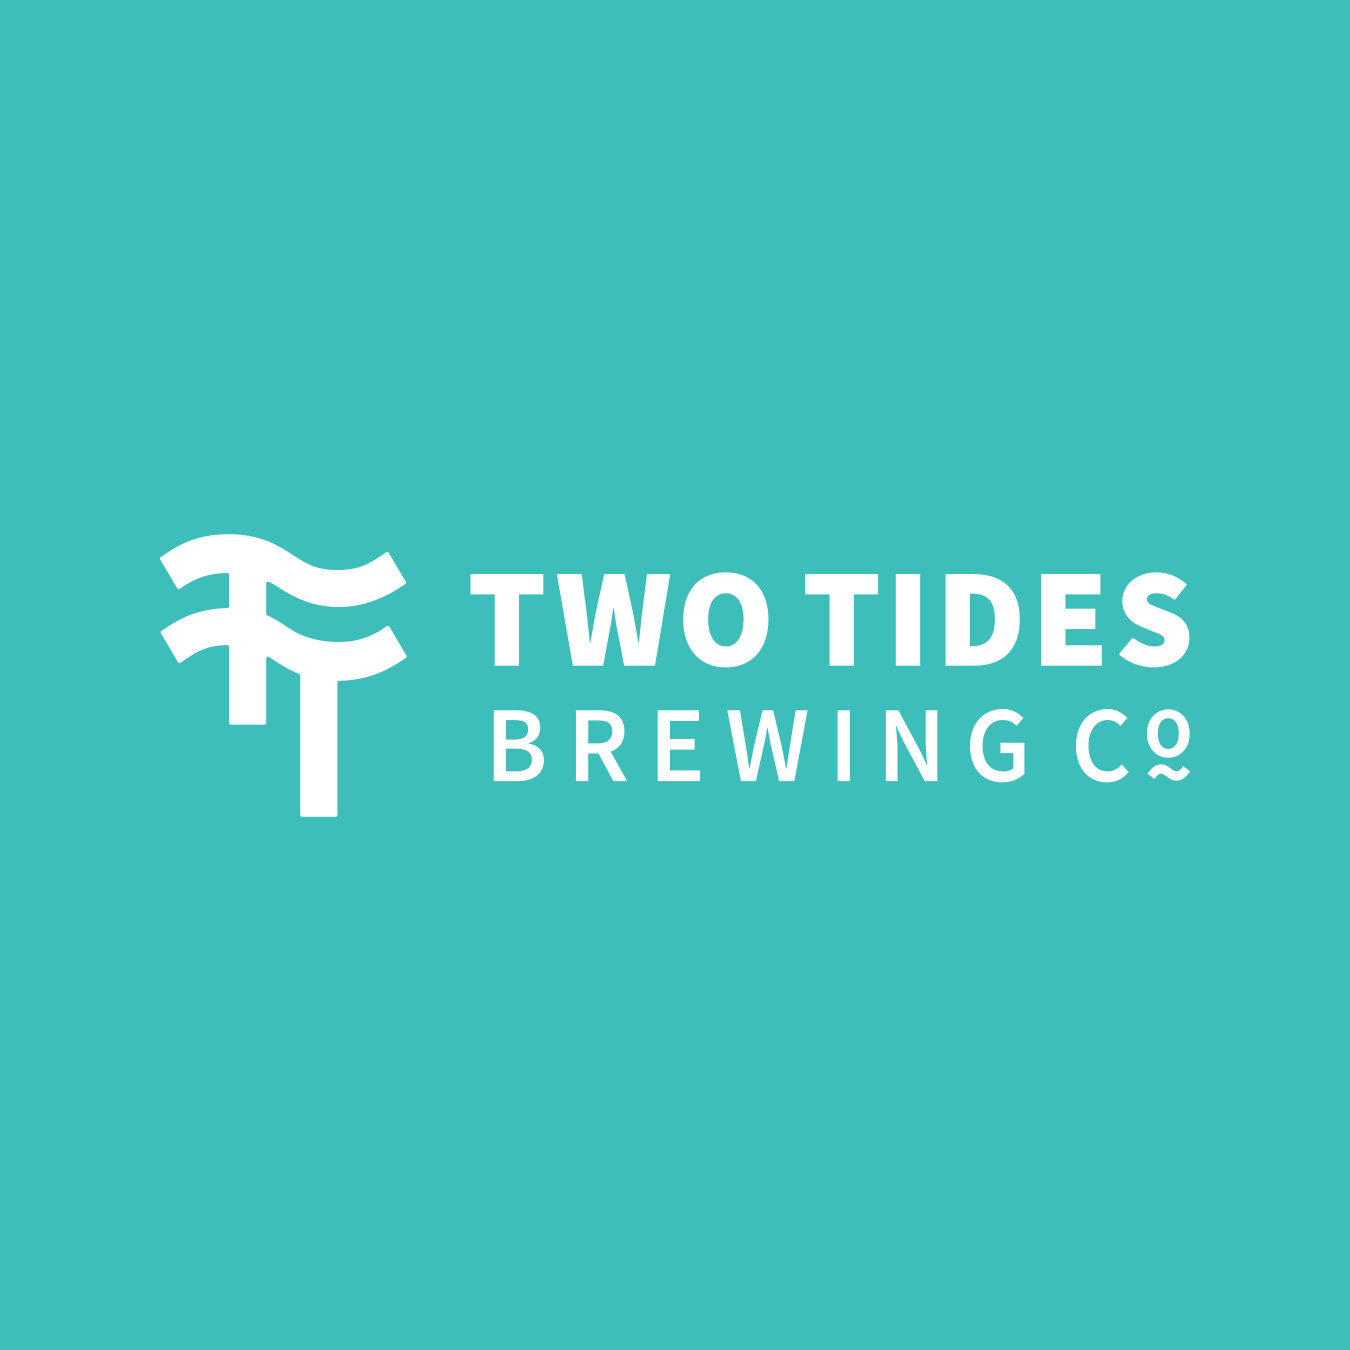 The Two Tides Brewing Co. logo on the Two Tides Teal.